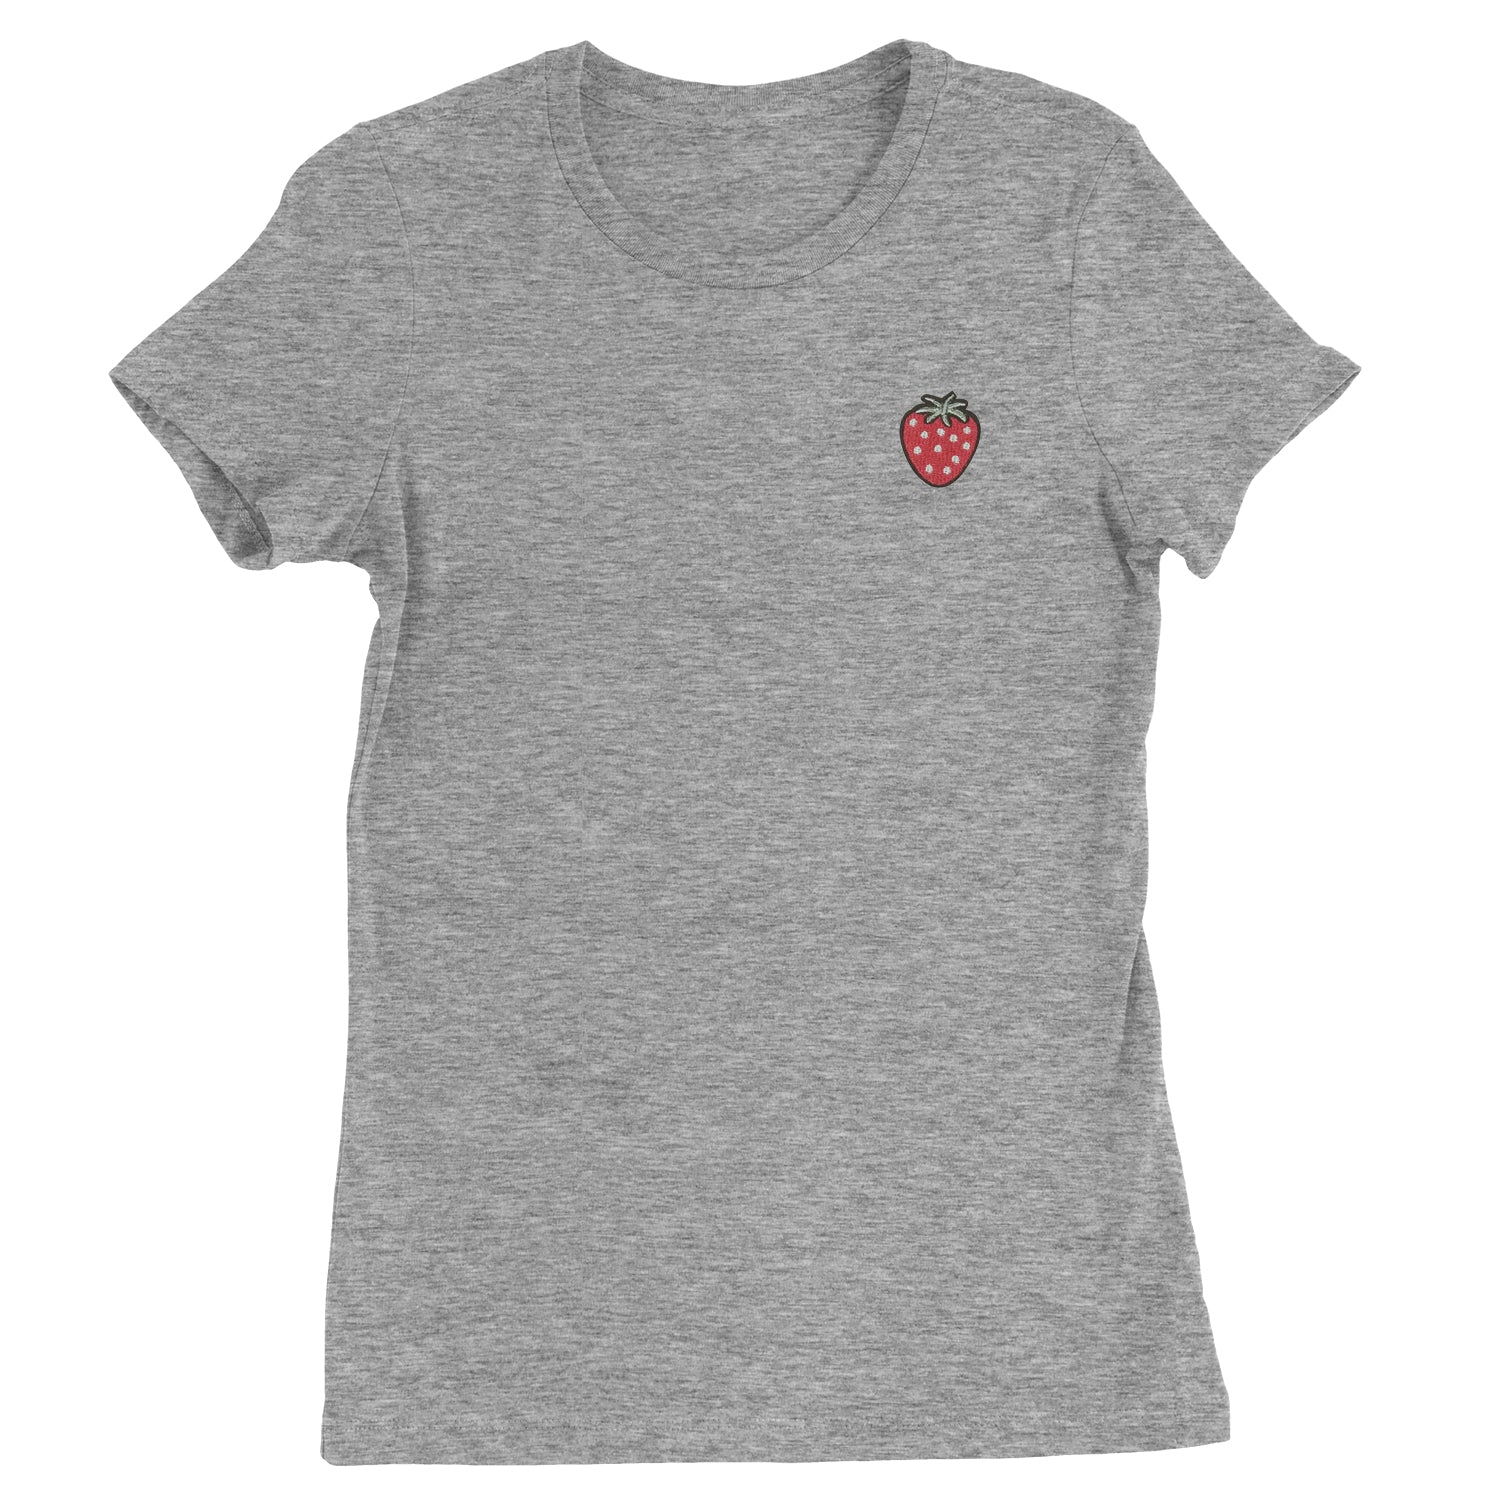 Embroidered Strawberry Patch (Pocket Print) Womens T-shirt fruit, strawberries by Expression Tees